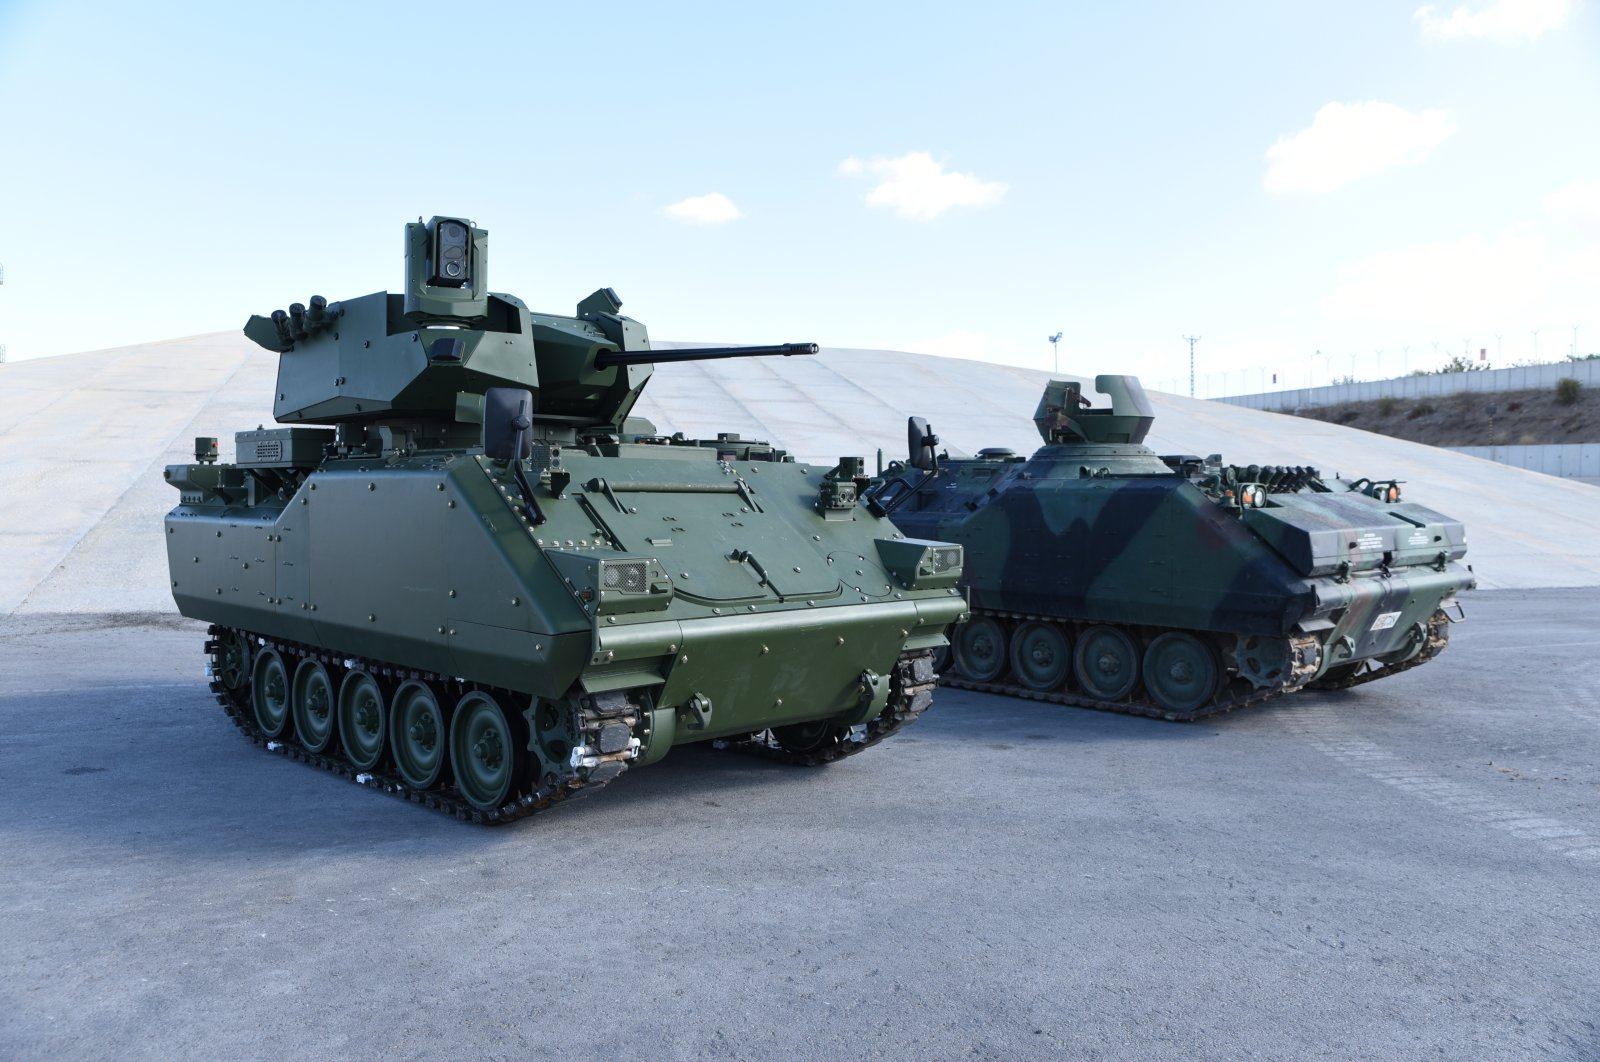 2 Turkish defense giants join forces to modernize armored combat vehicles